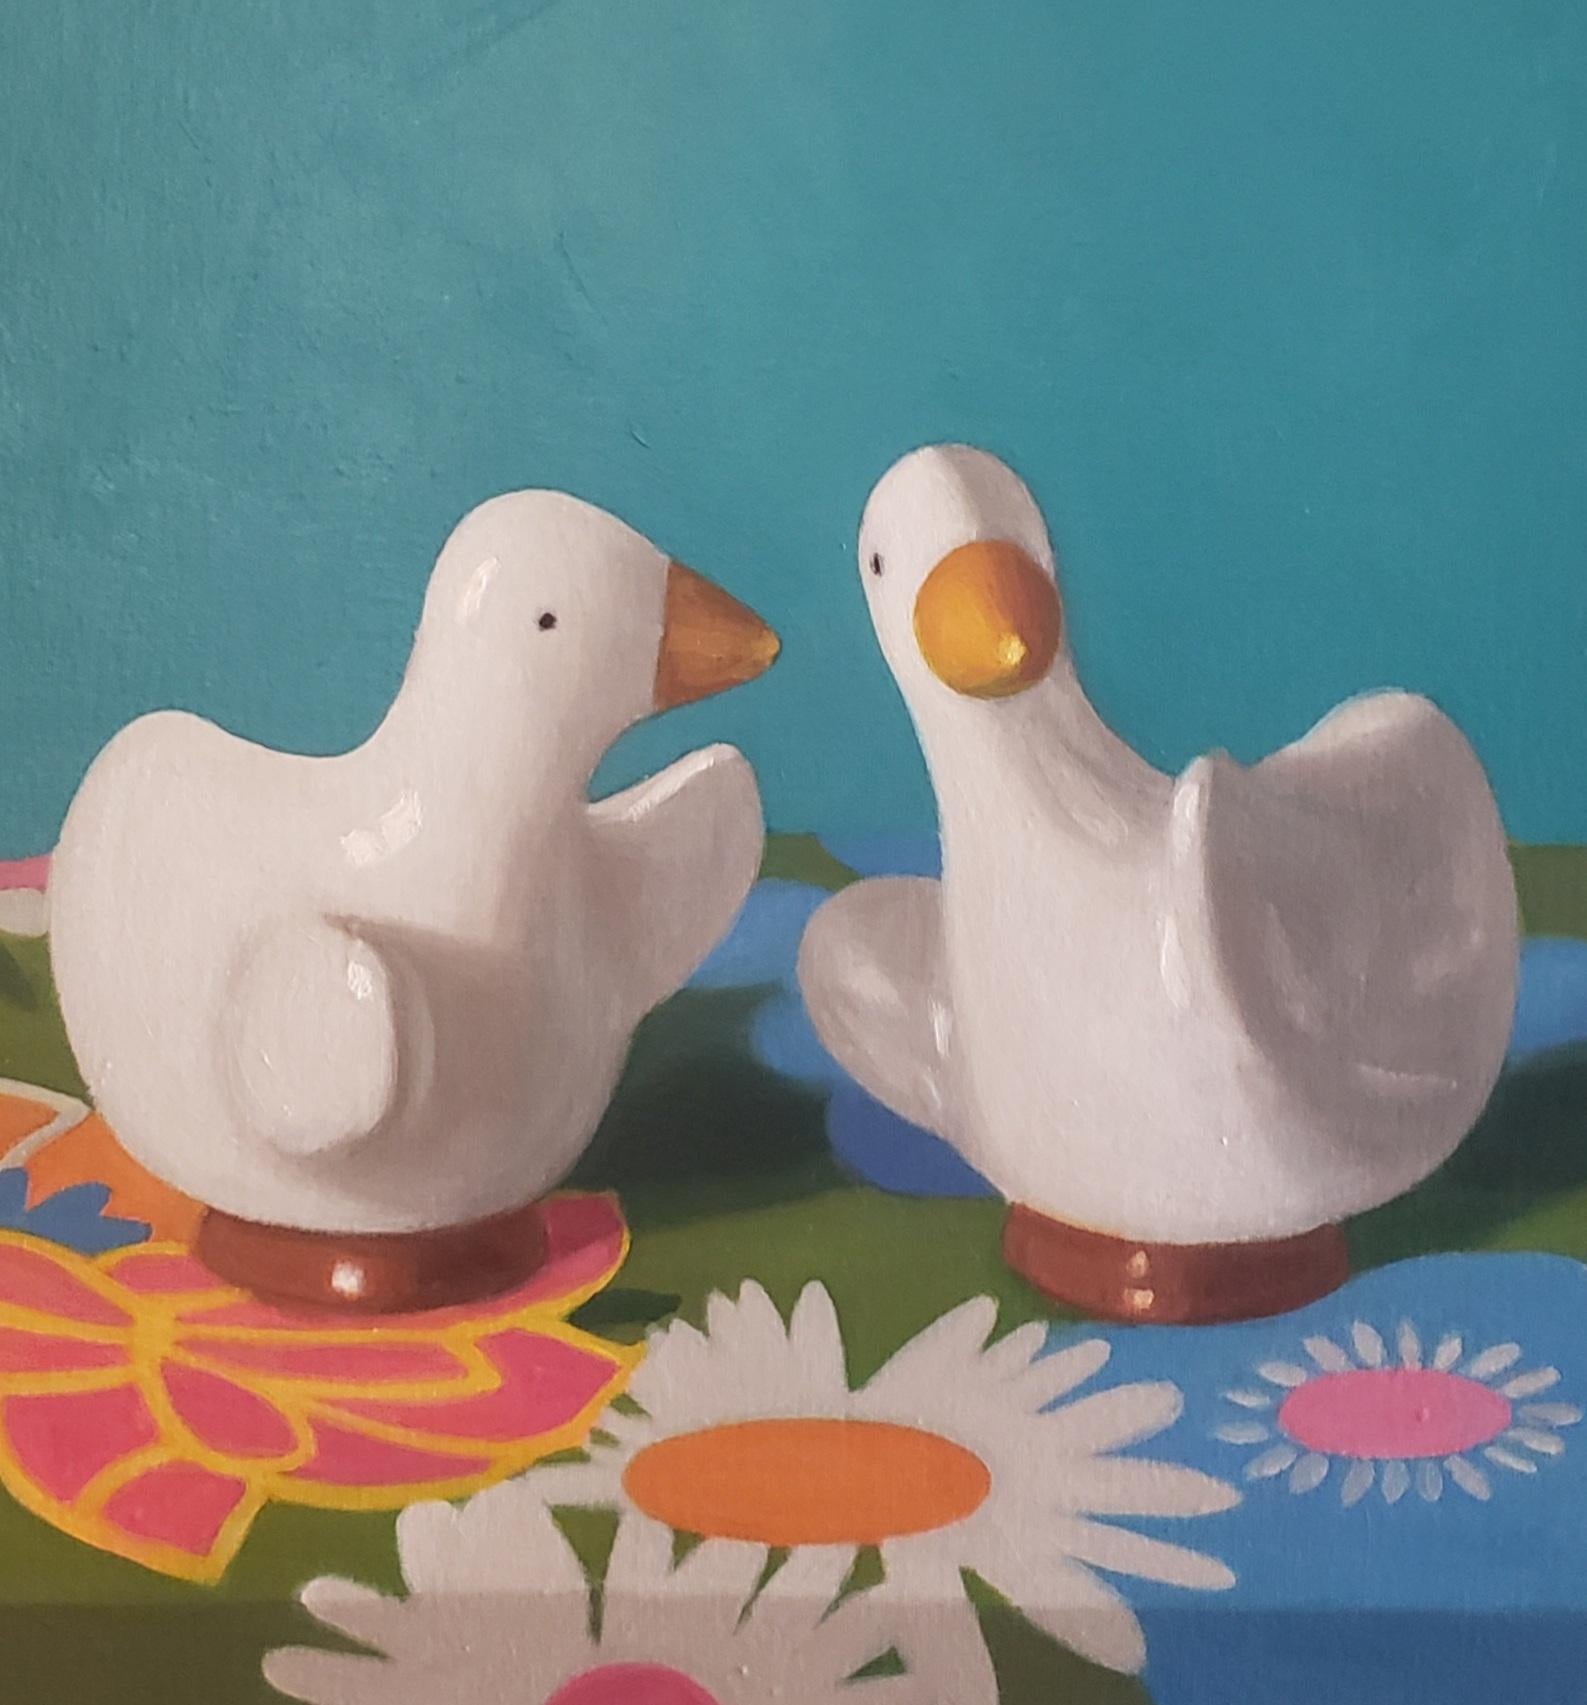  Marimekko Ducks, Oil Canvas, American Art, Realism, Tchotskes Quirky Objects - Realist Painting by MAUREEN O'CONNER